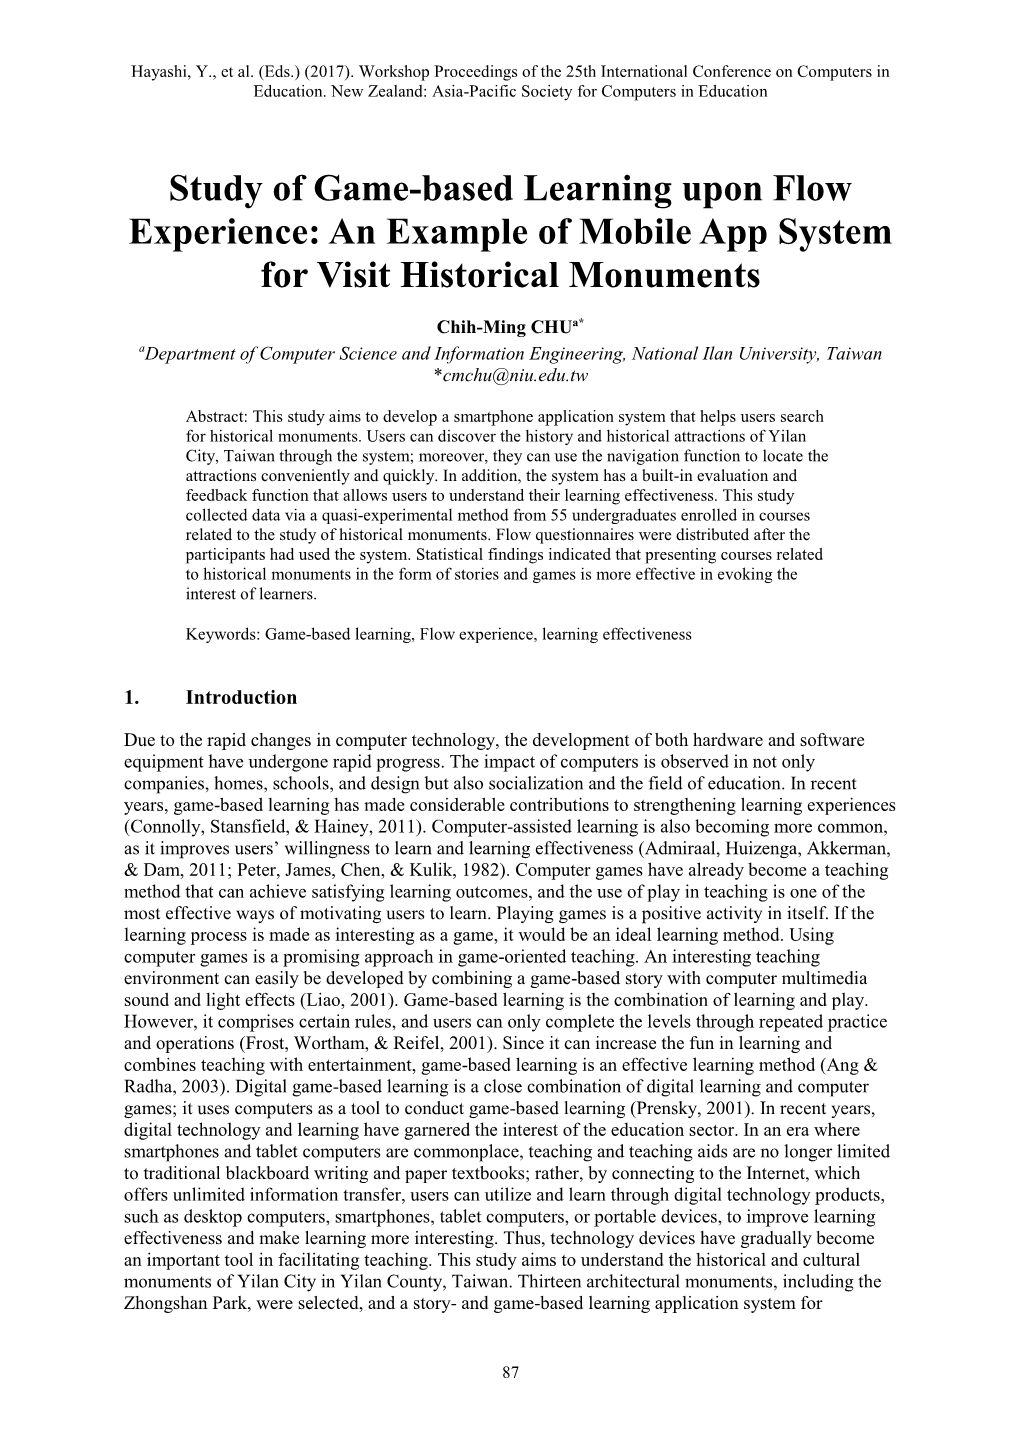 Study of Game-Based Learning Upon Flow Experience: an Example of Mobile App System for Visit Historical Monuments